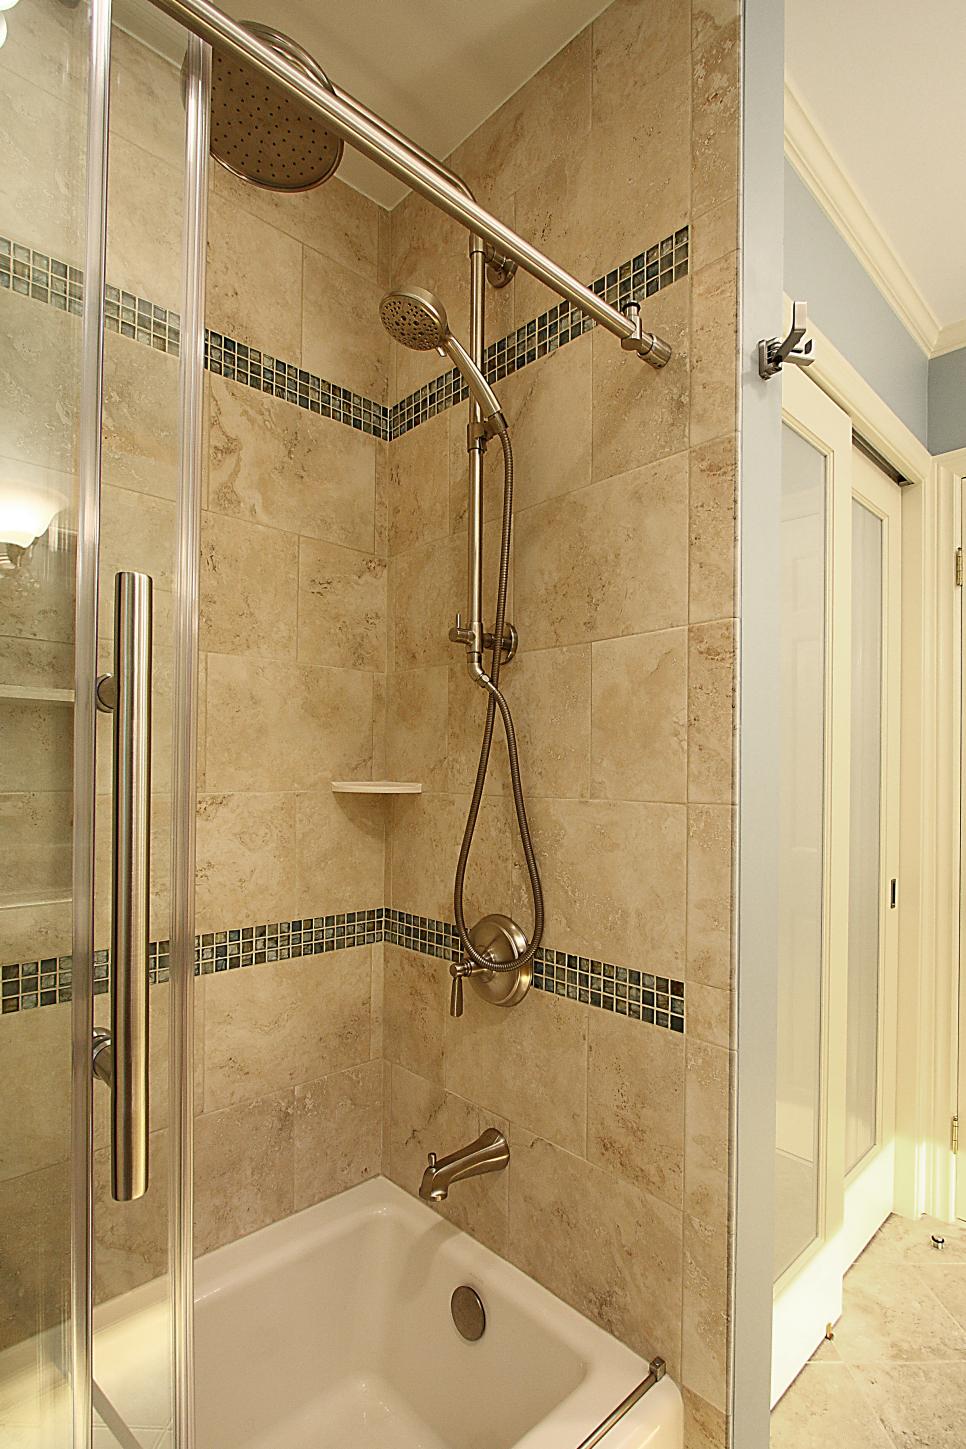 Neutral Tile Shower With Brushed Nickel Fixtures | HGTV